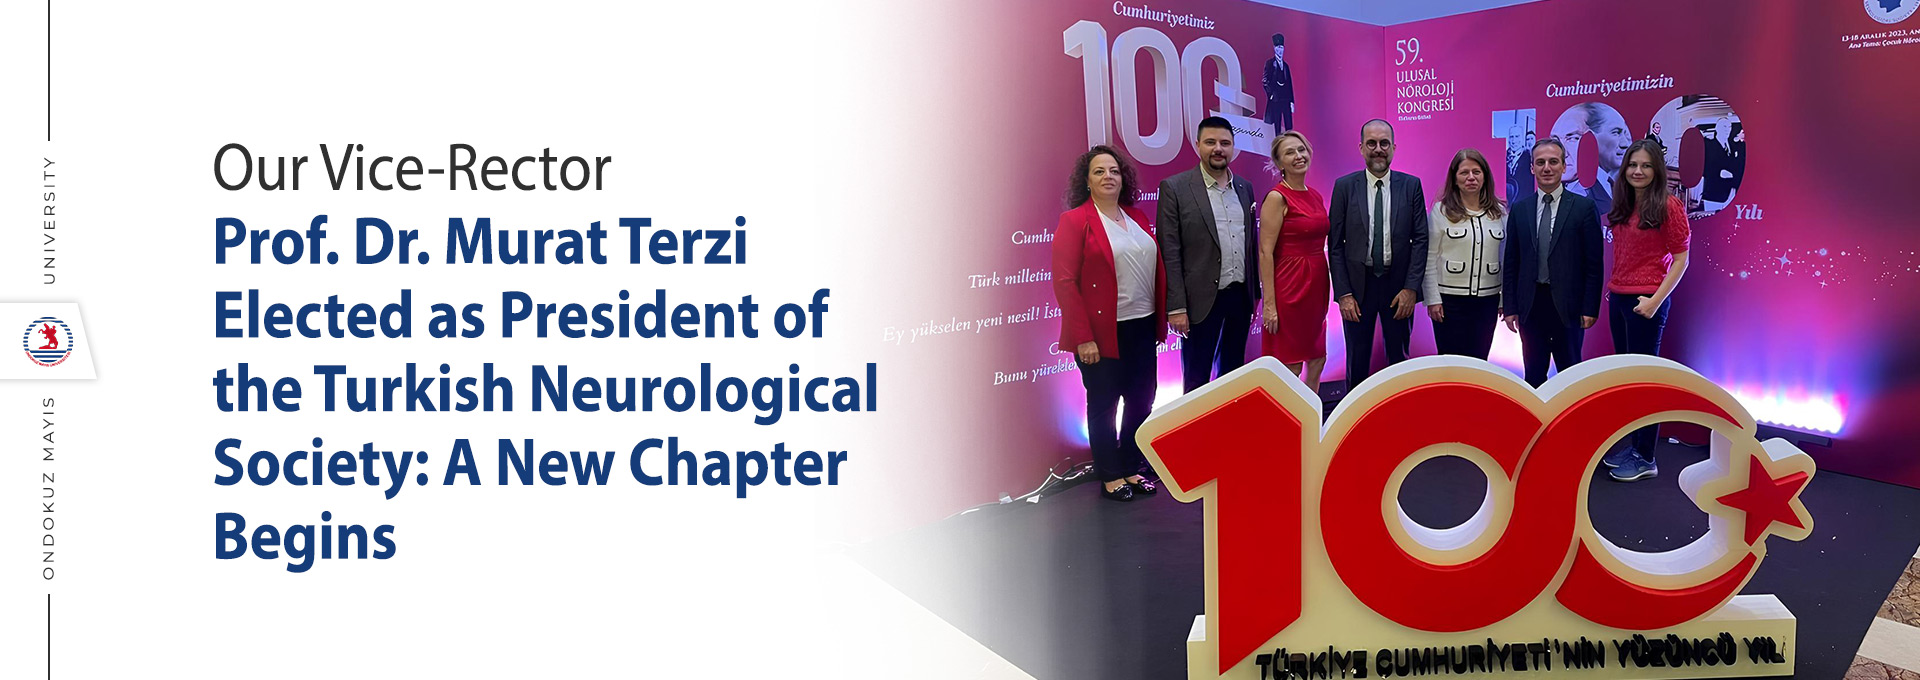 Prof. Dr. Murat Terzi Elected as President of the Turkish Neurological Society: A New Chapter Begins